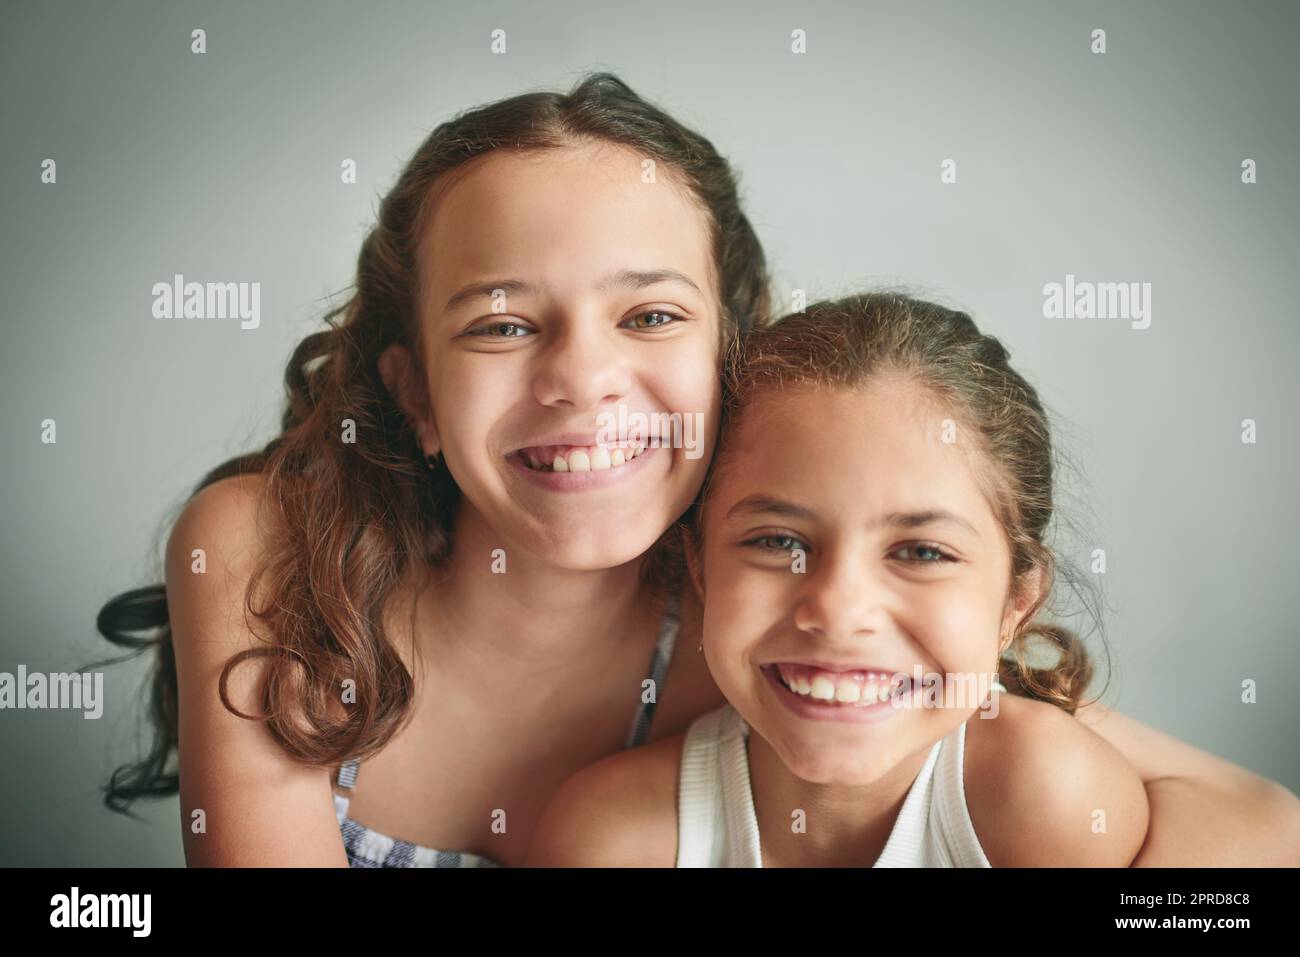 Were sisters and best friends. two young girls spending time together at home. Stock Photo